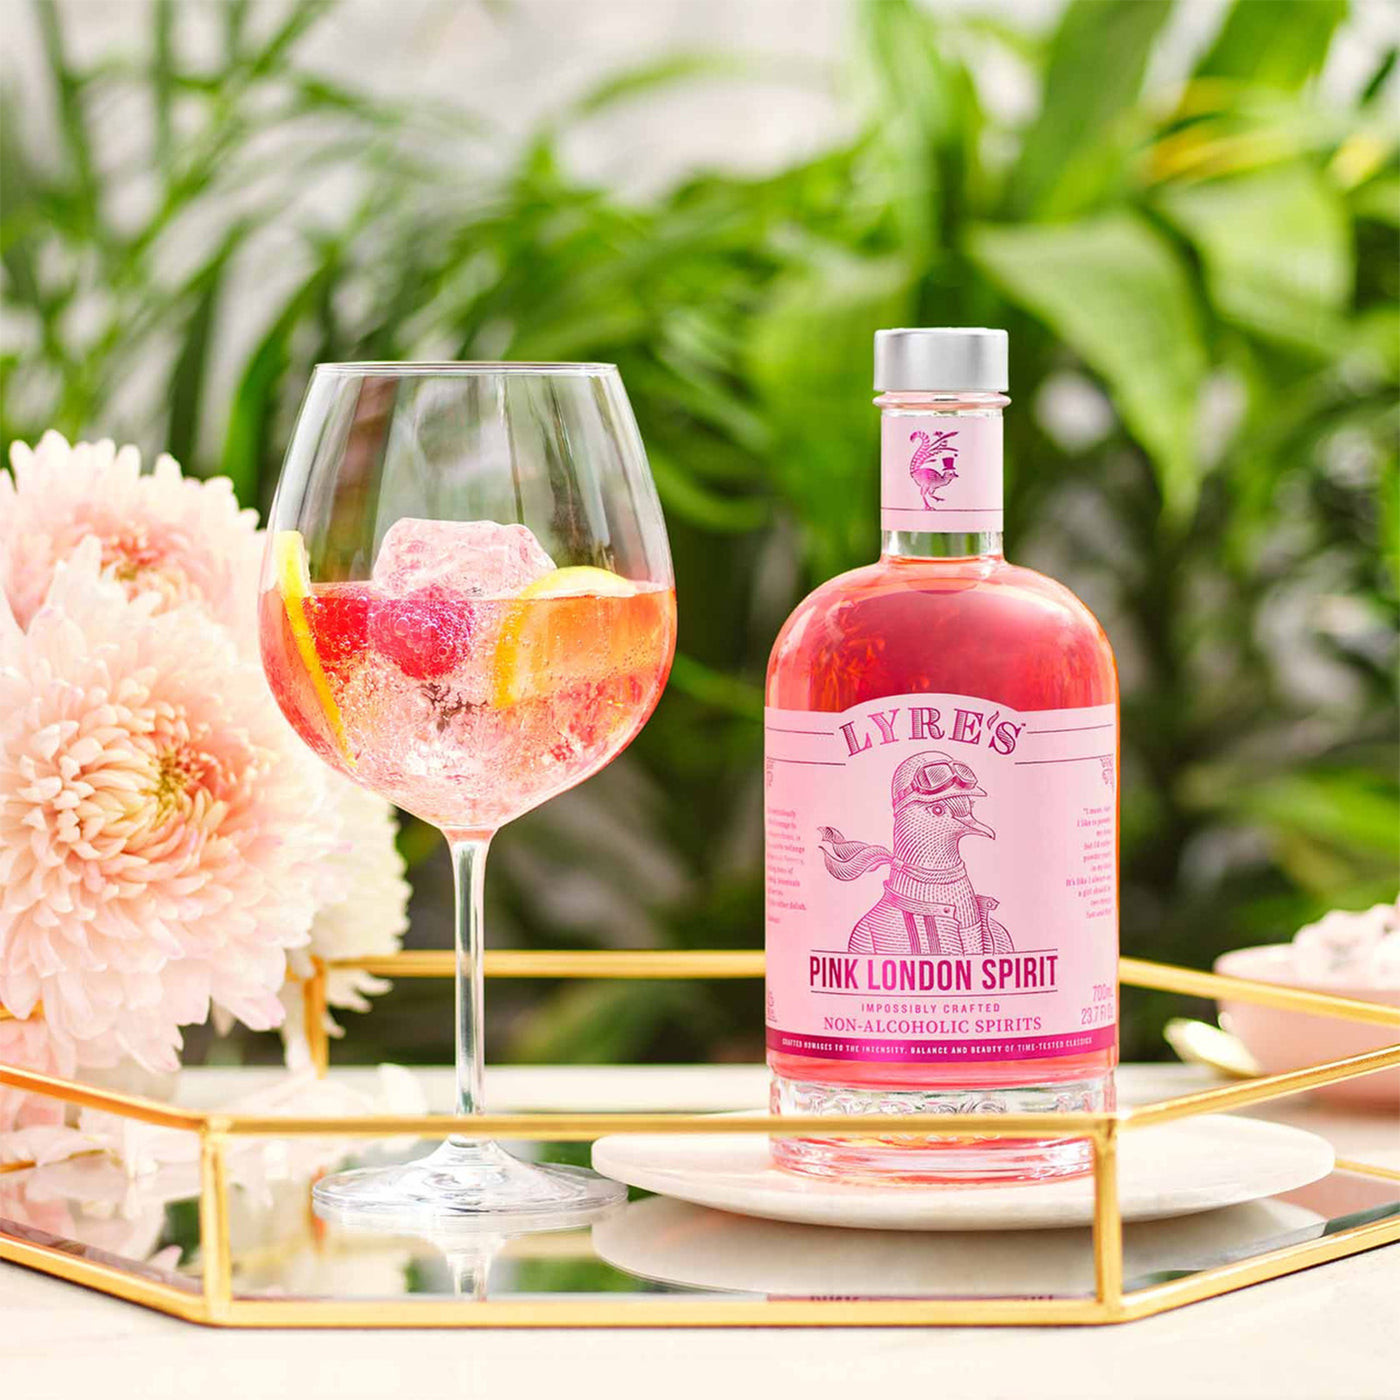 Lyre's non-alcoholic pink gin spritz